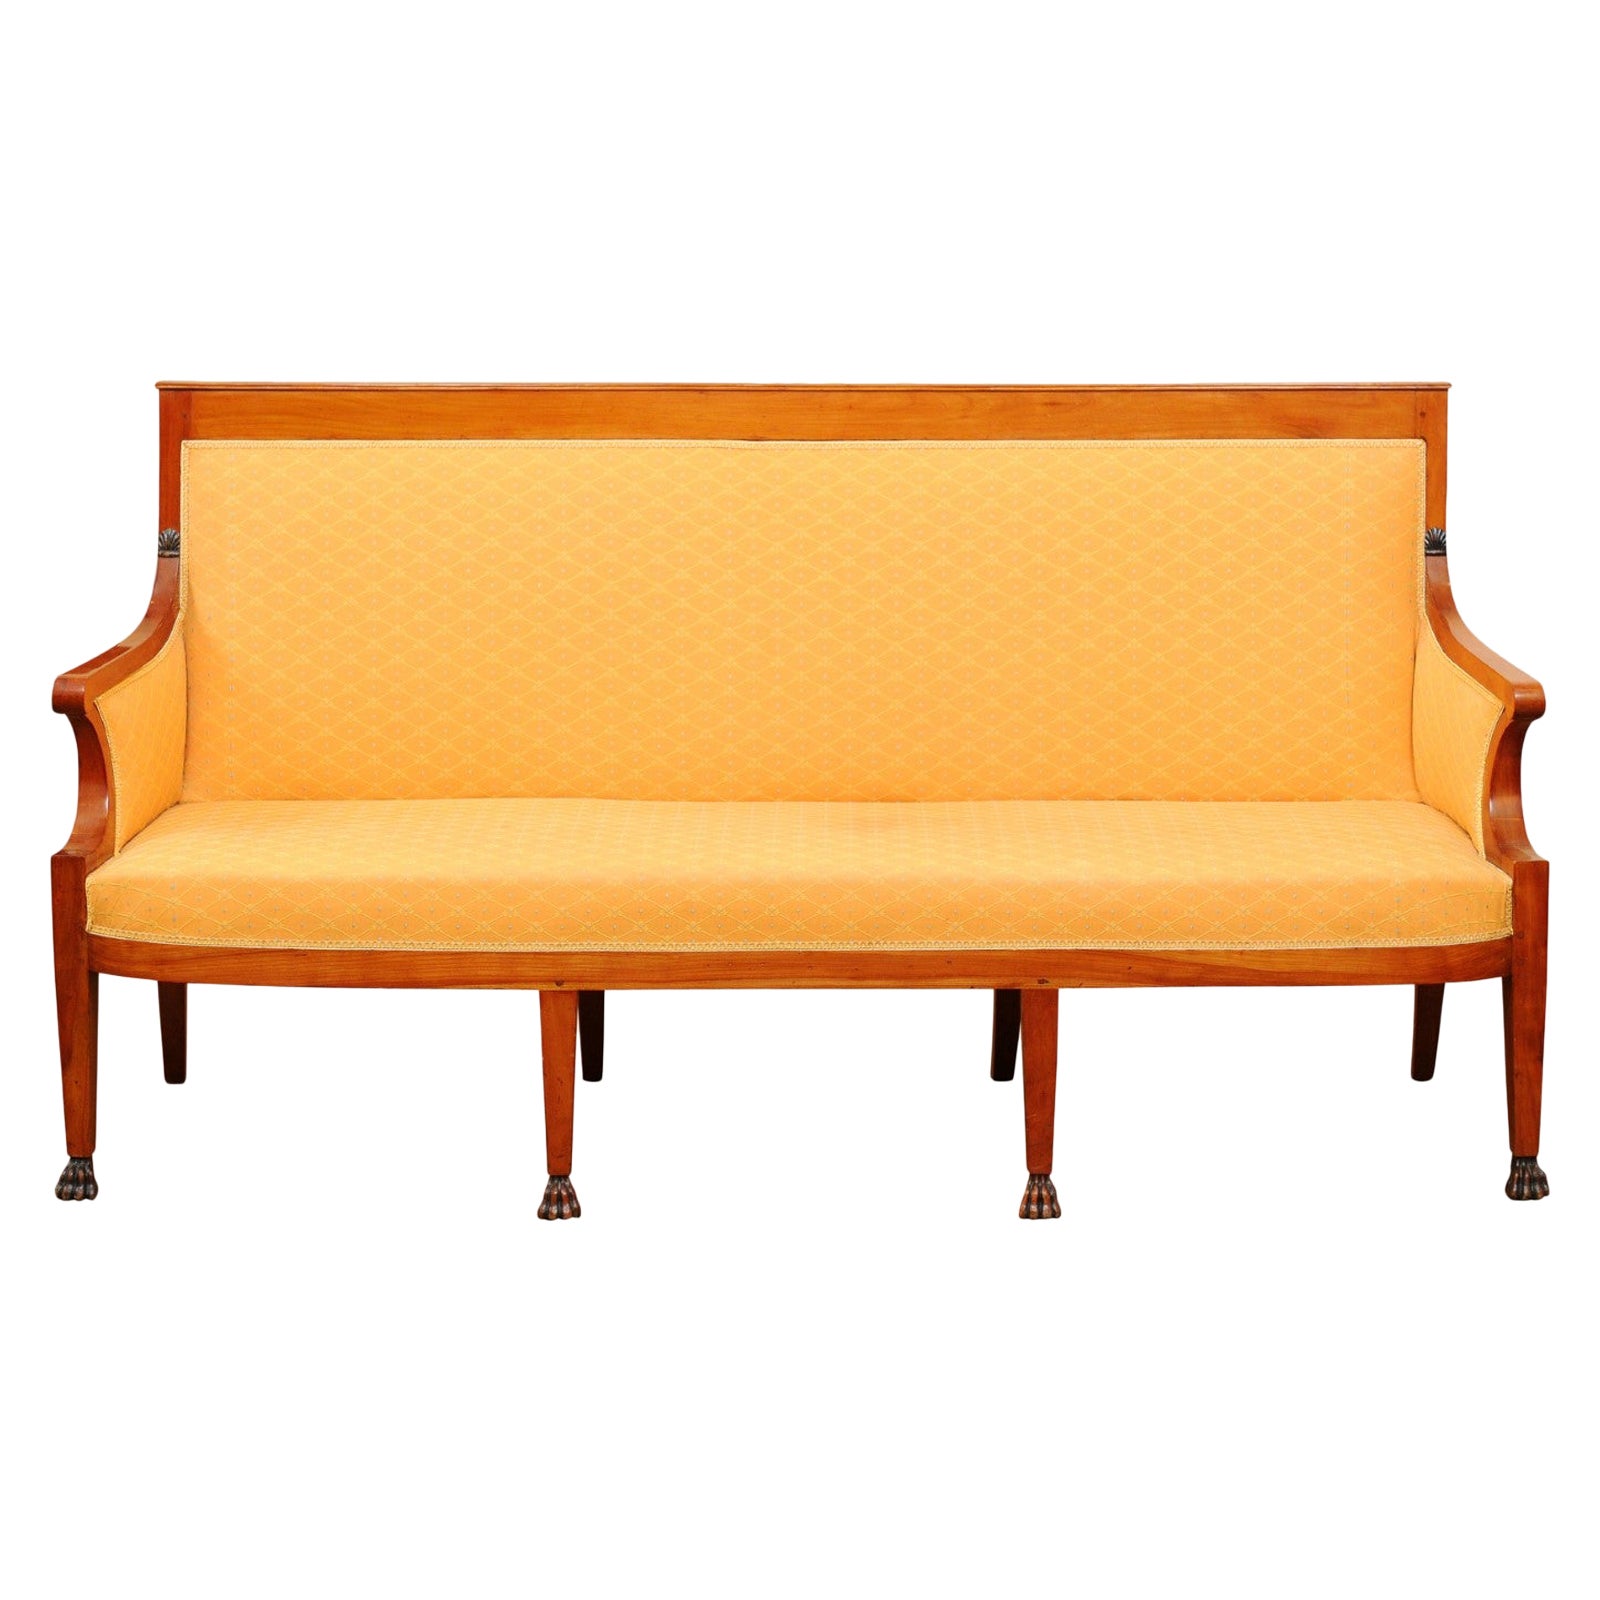 Directoire Sofa in Fruitwood with Paw Feet, France, ca. 1800 For Sale